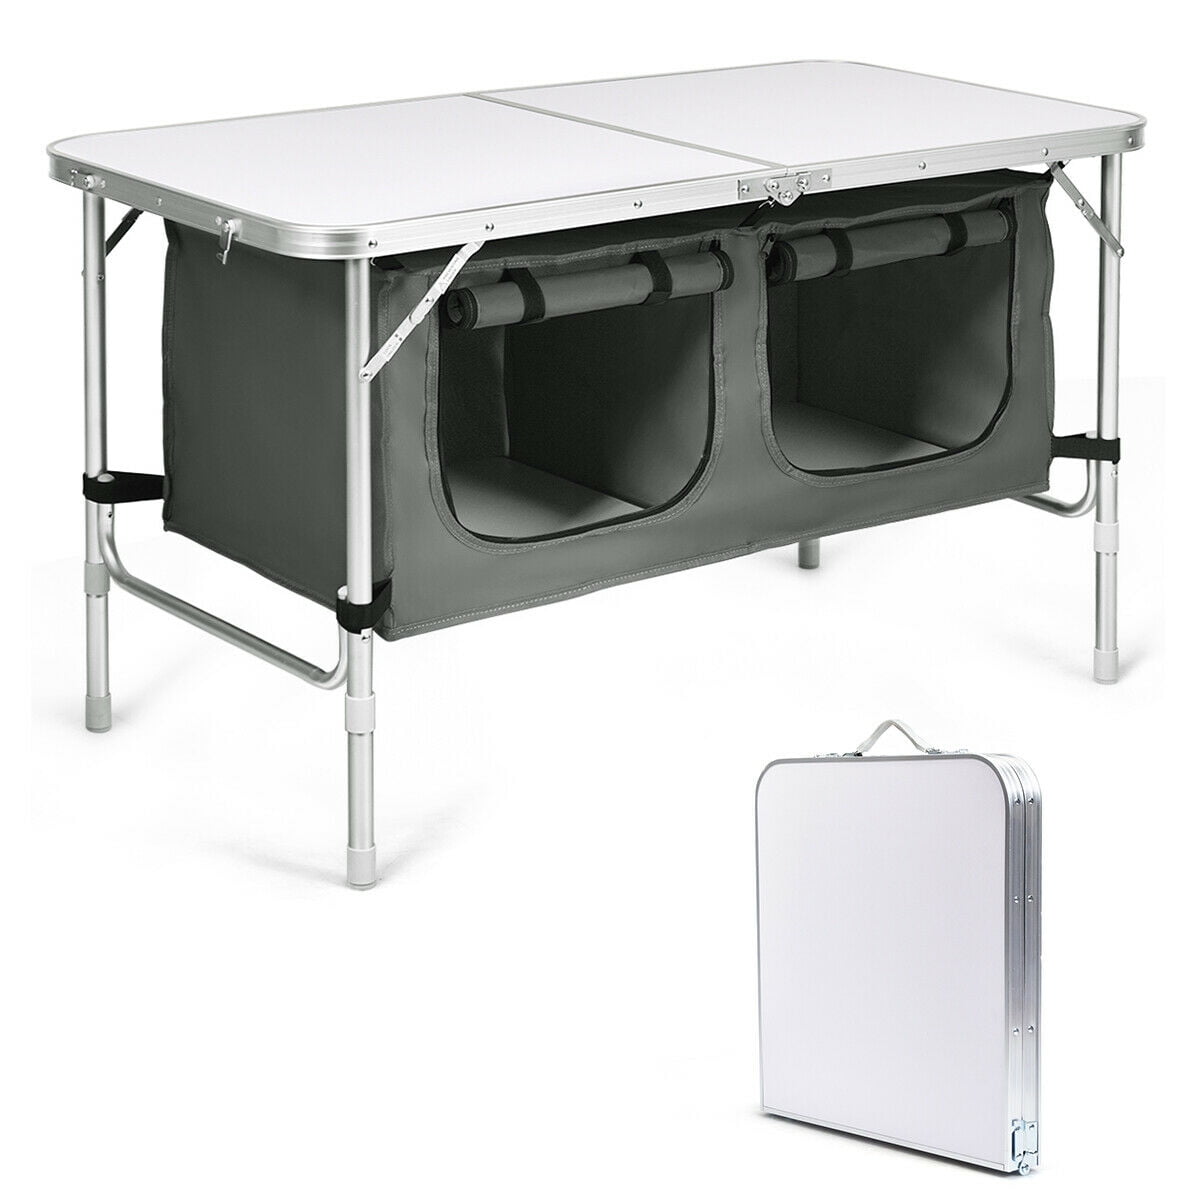 Fold Away Portable Camp Table Folding Camp Kitchen Table w/ Storage Aluminum 